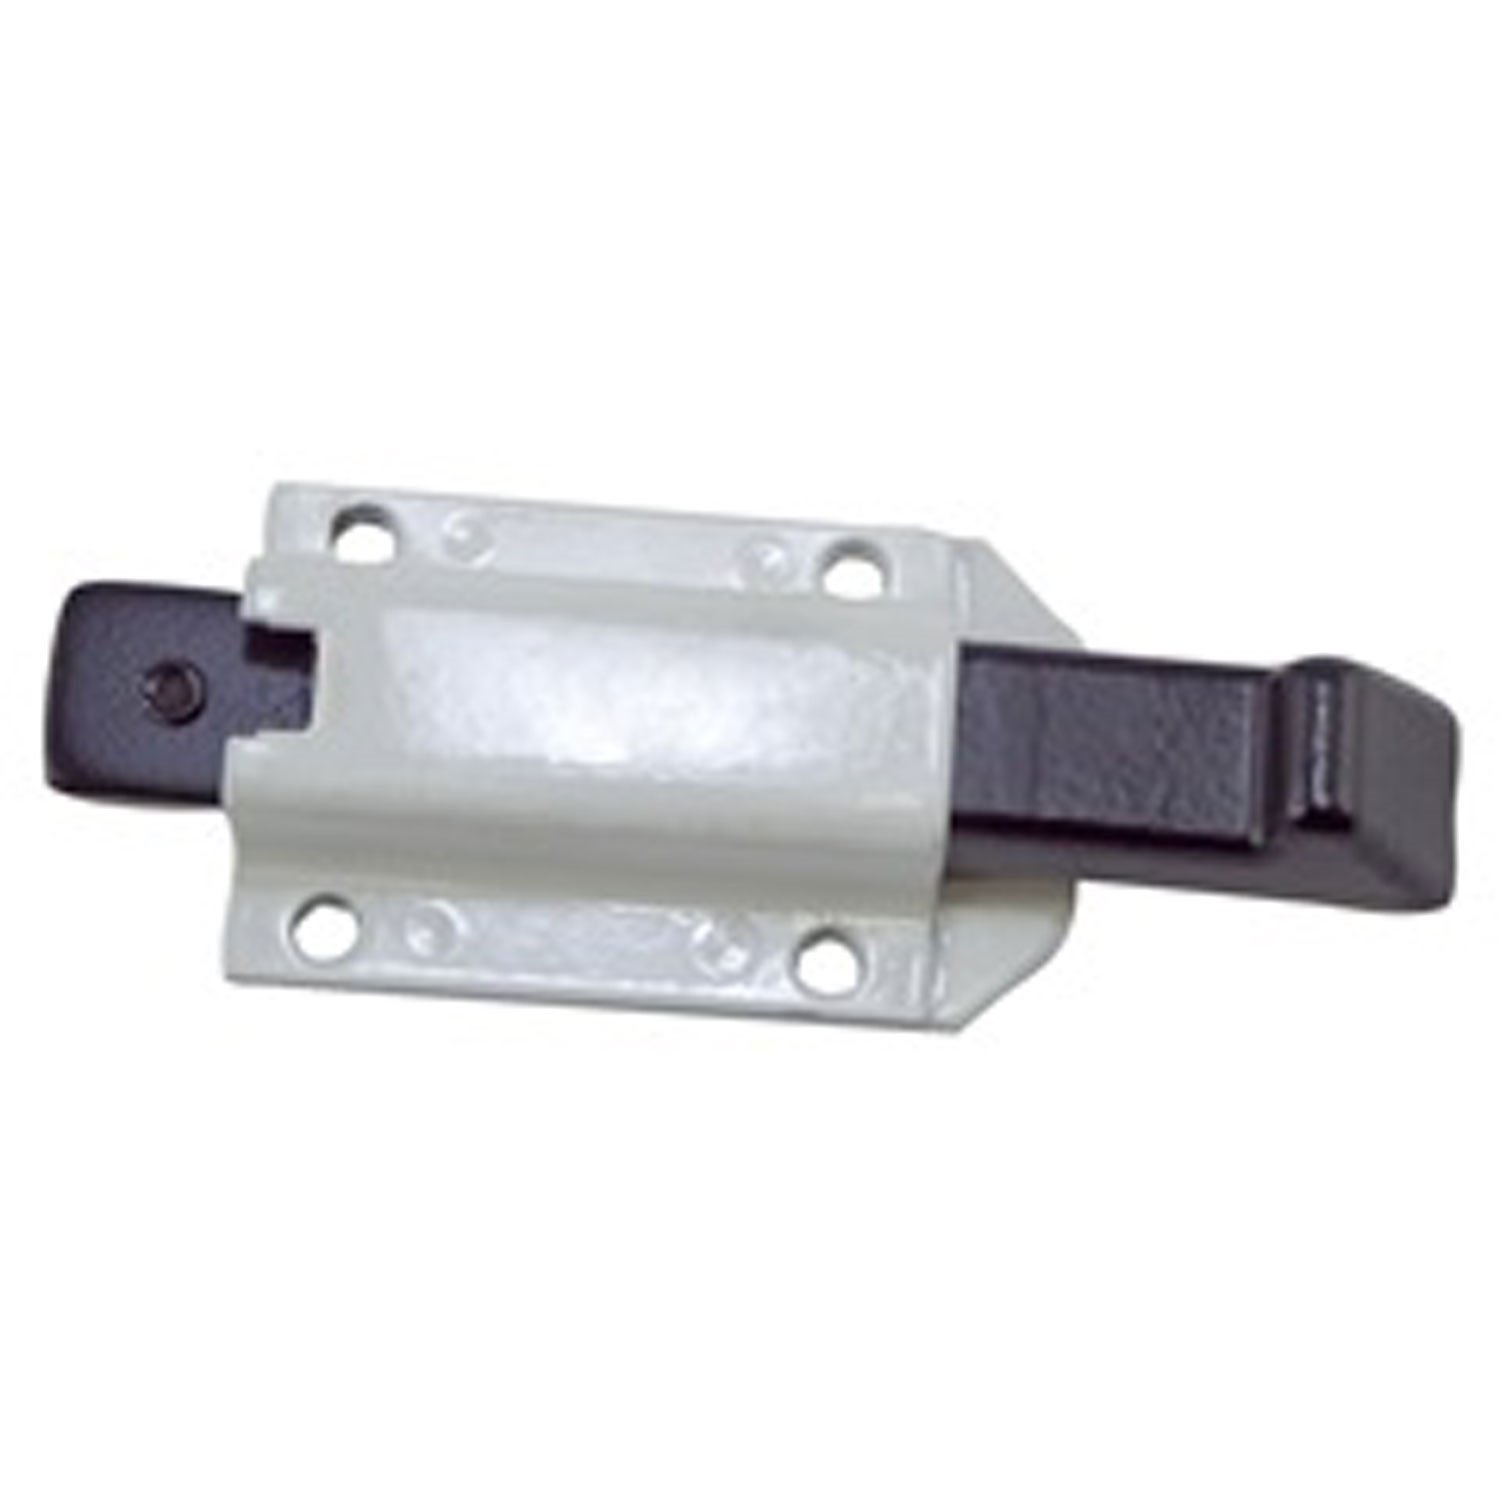 Replacement hardtop liftgate latch from Omix-ADA, Fits 76-86 Jeep CJ7 and 81-86 CJ8 Sold indivi